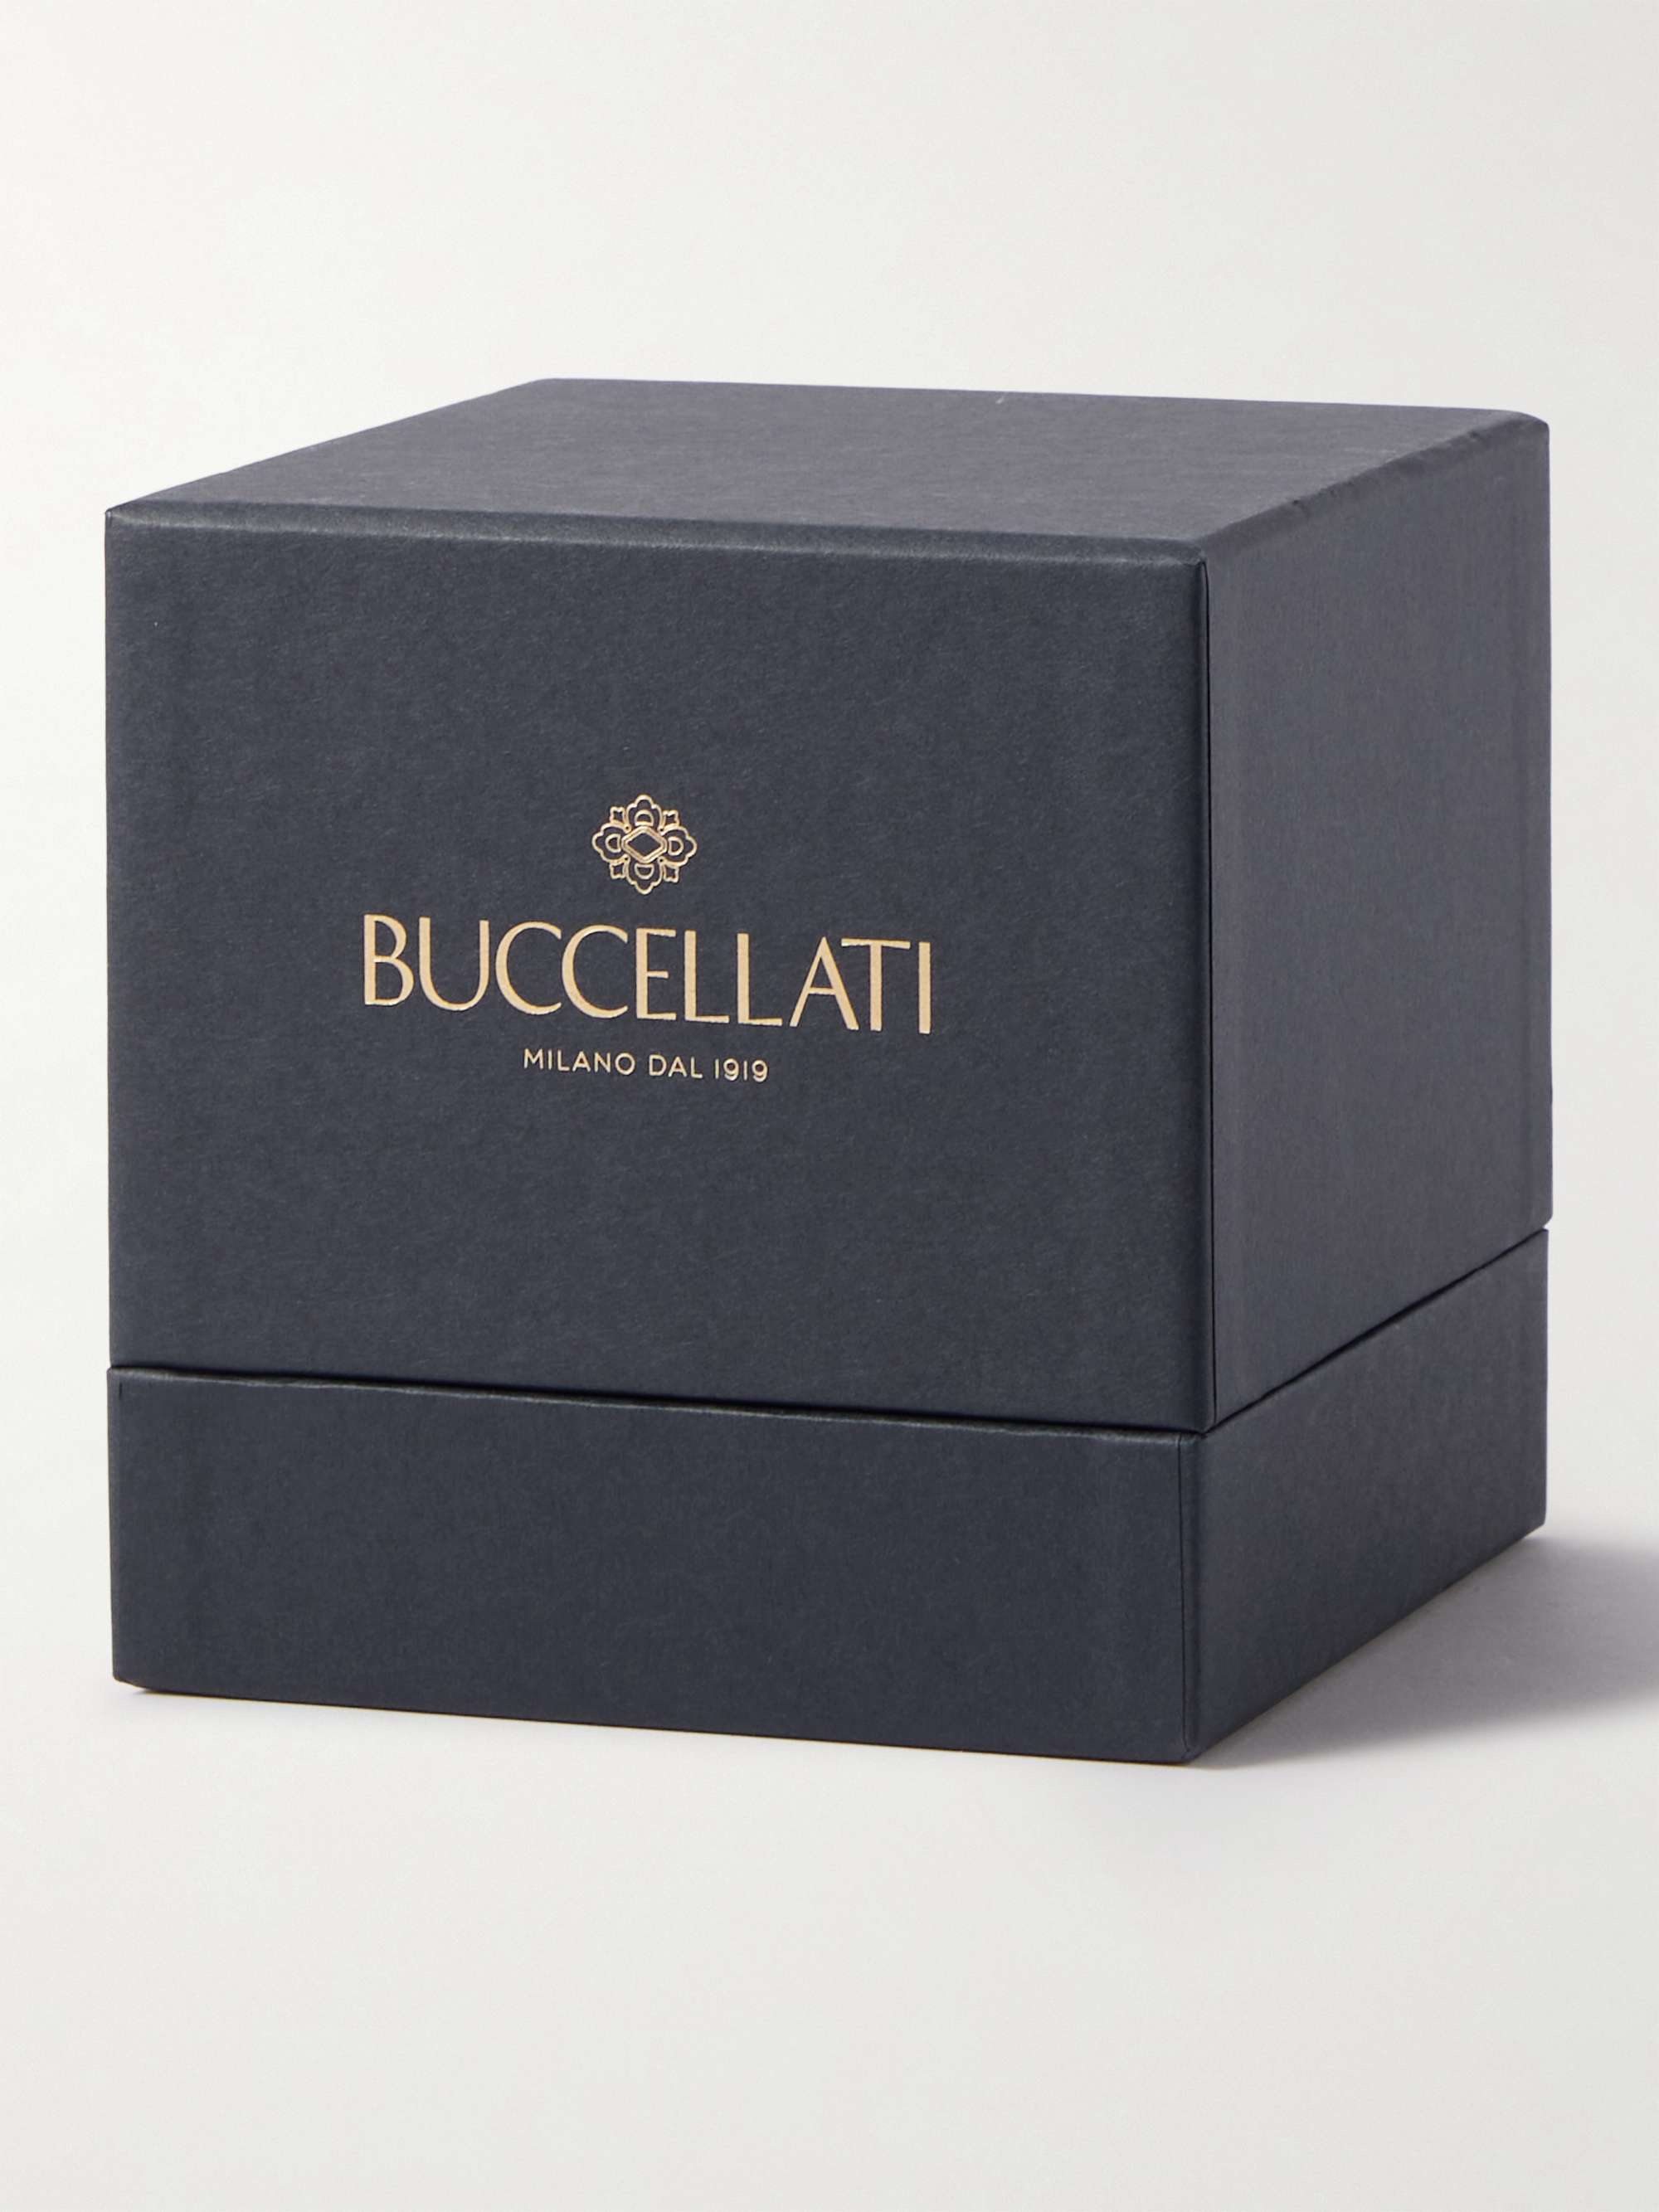 BUCCELLATI Scented Candle, 320g